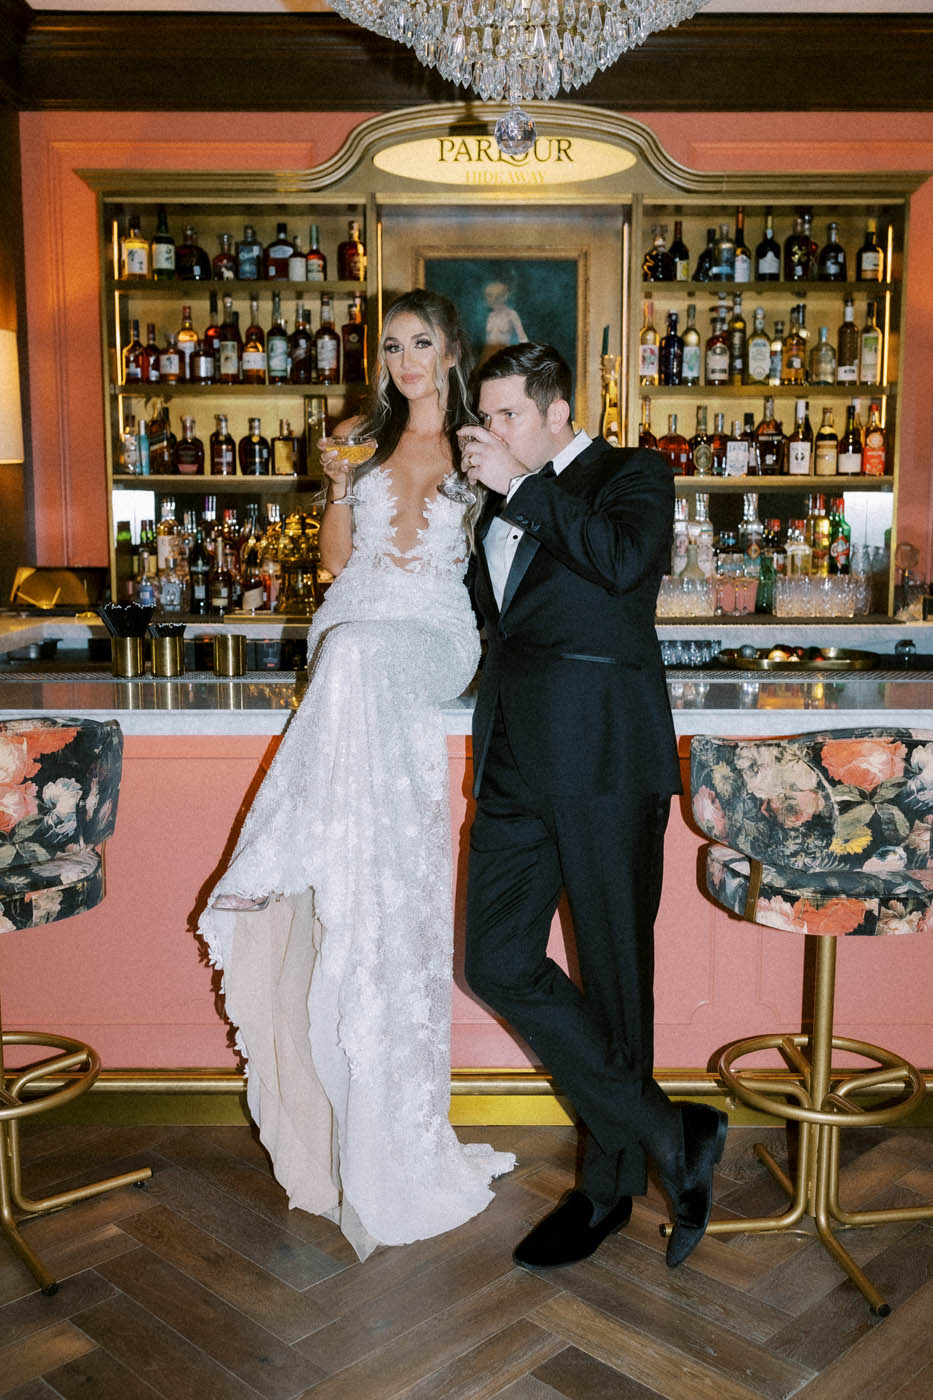 the bride and groom pose together on the bar in the C Baldwin Hotel's secret ladies lounge